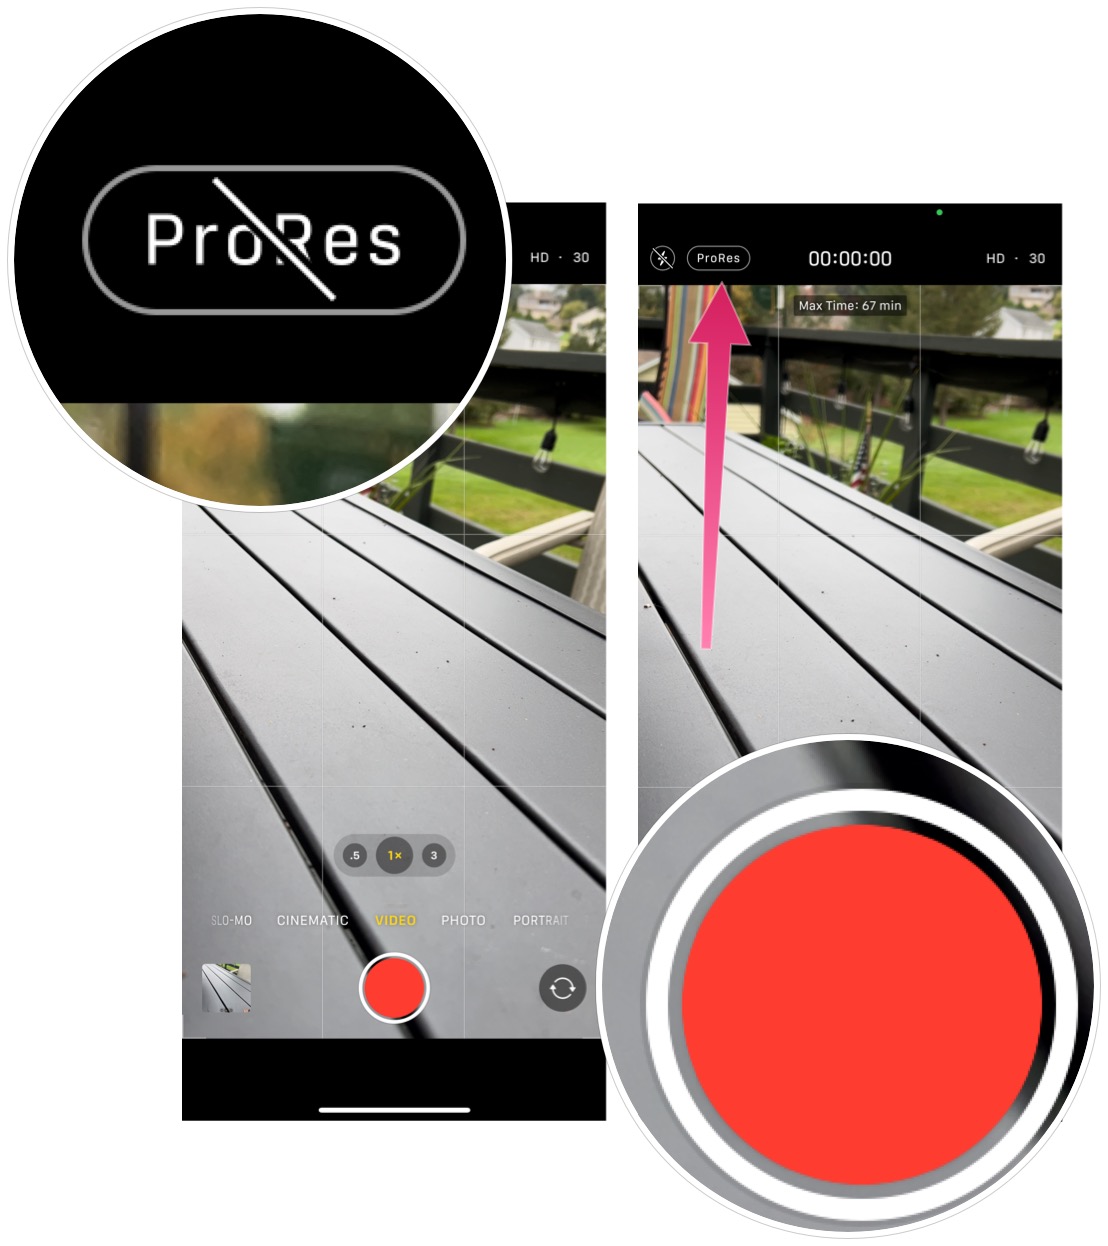 To use ProRes, tap the ProRes button, begin recording, stop when finished.